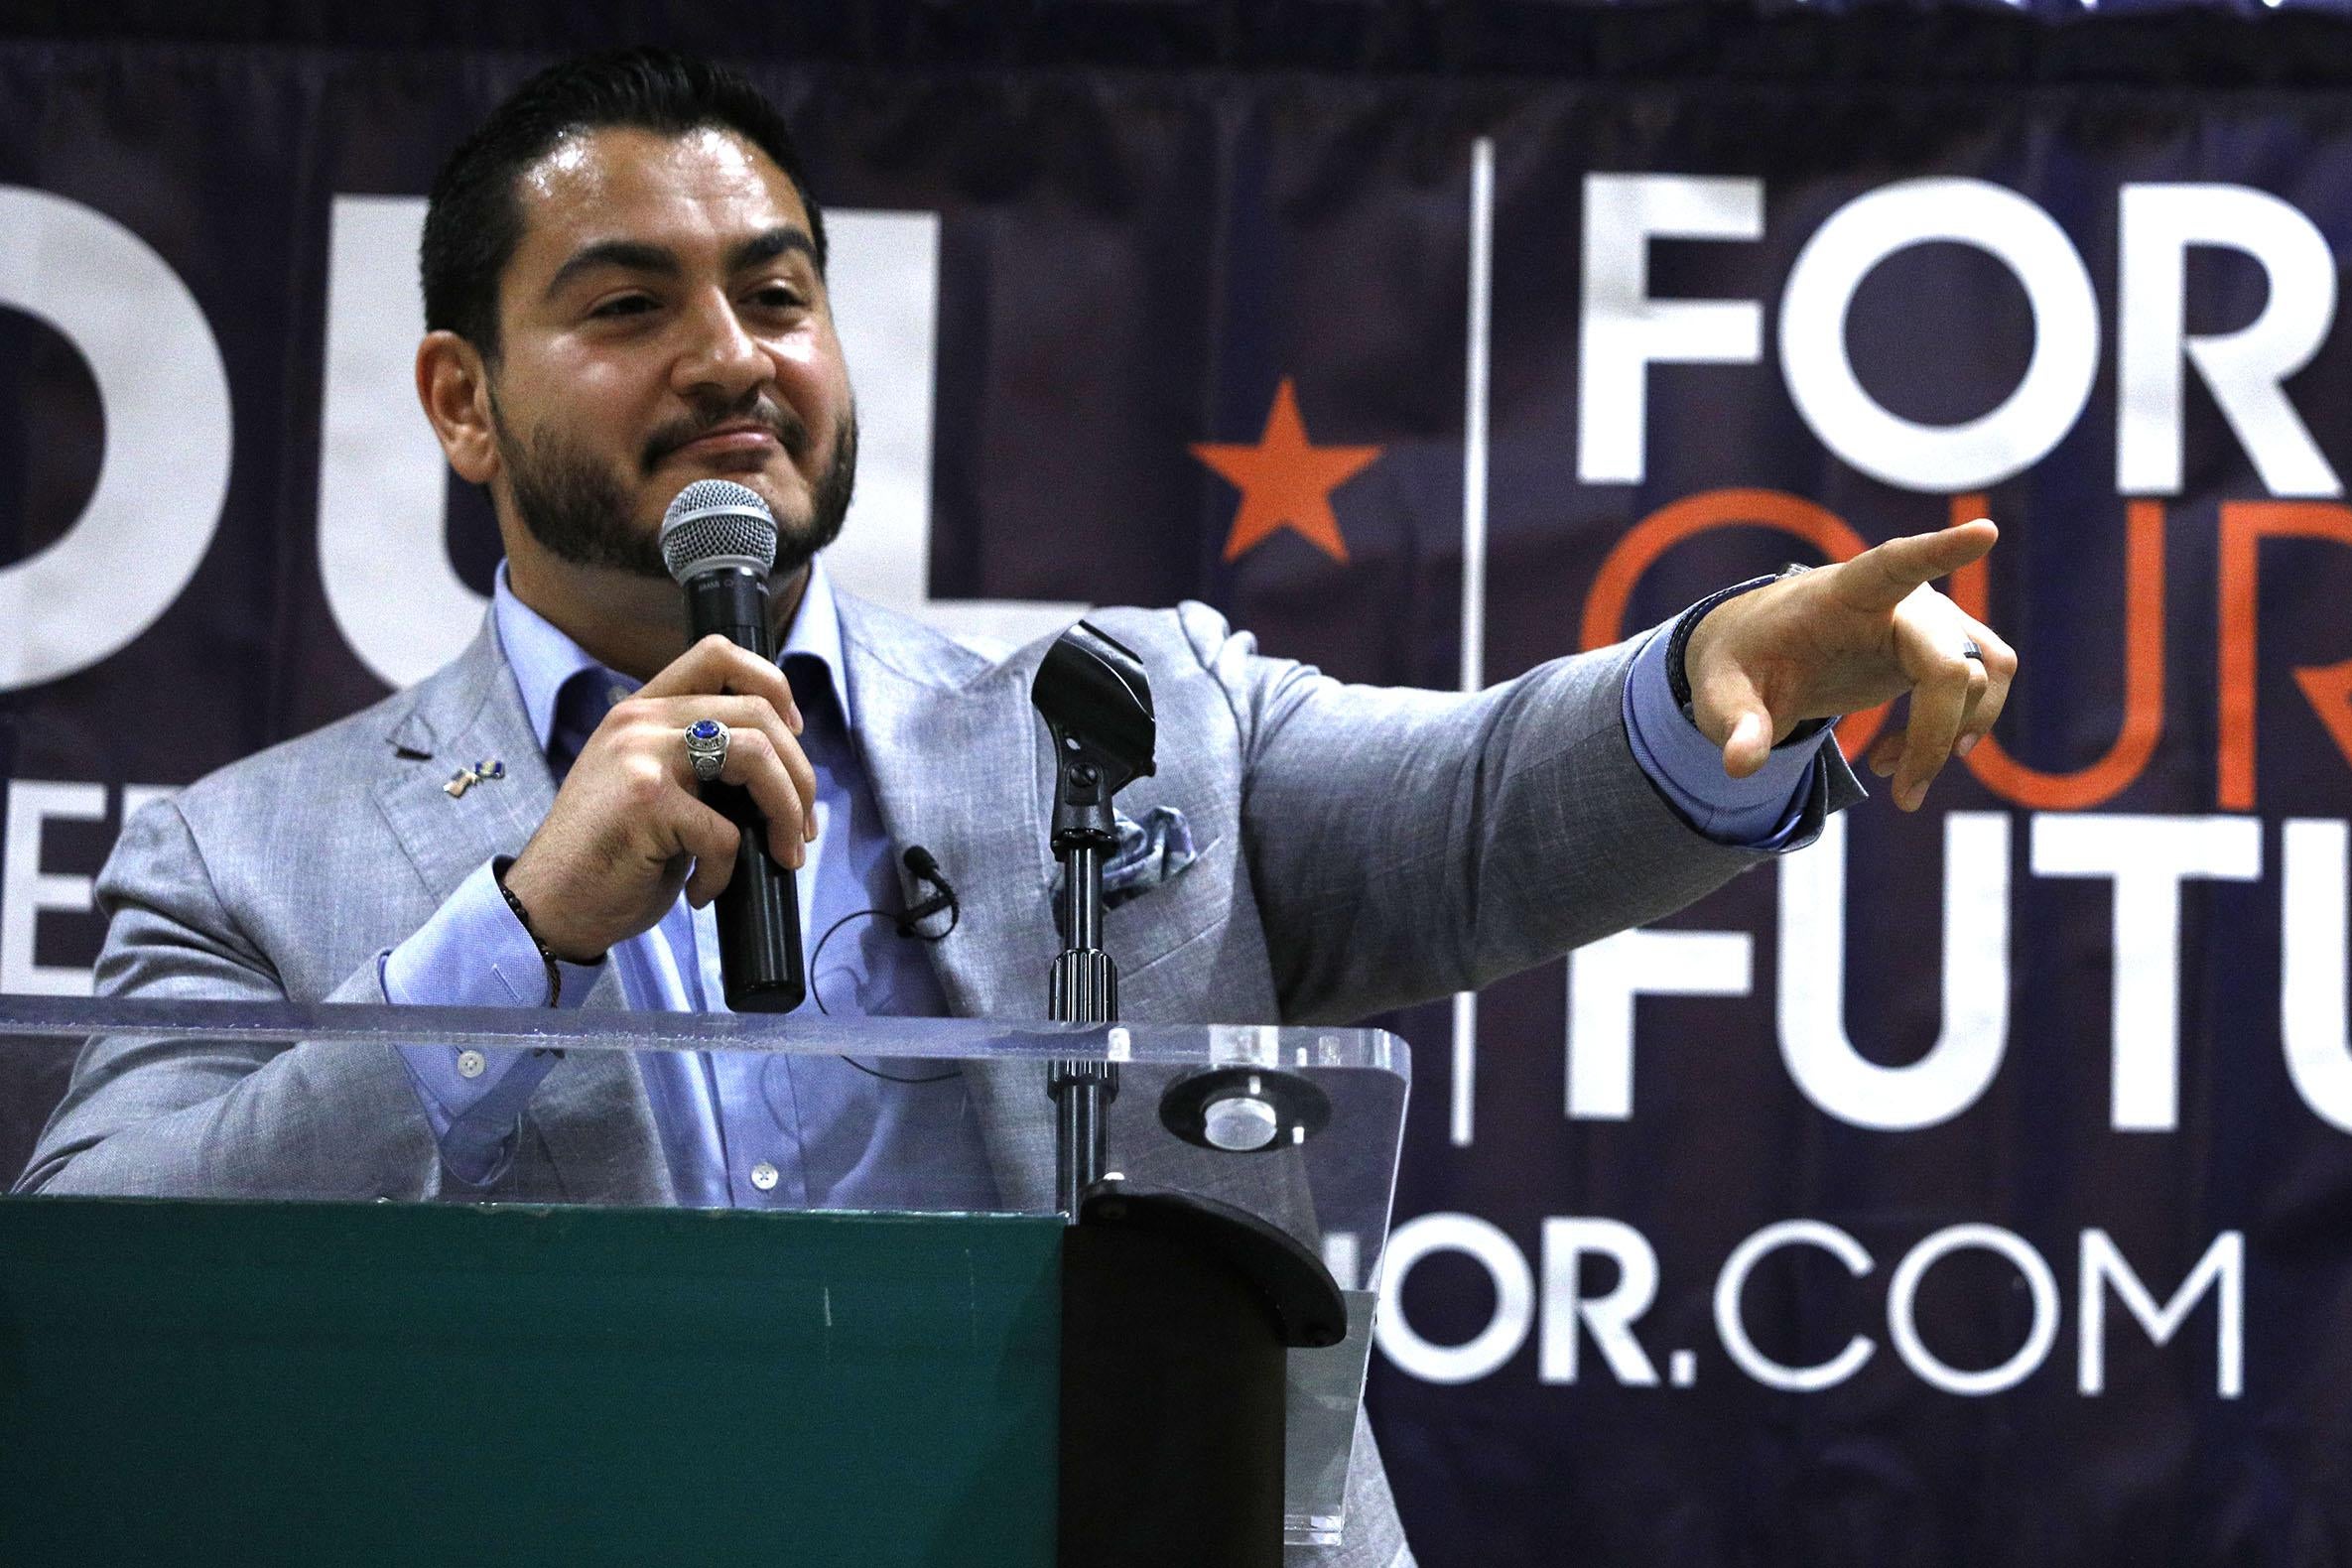 Michigan Democratic gubernatorial candidate Abdul El-Sayed campaigns with support from New York Democrat candidate for Congress Alexandria Ocasio-Cortez at a rally on the campus of Wayne State University July 28, 2018 in Detroit, Michigan. (Photo by Bill Pugliano/Getty Images)